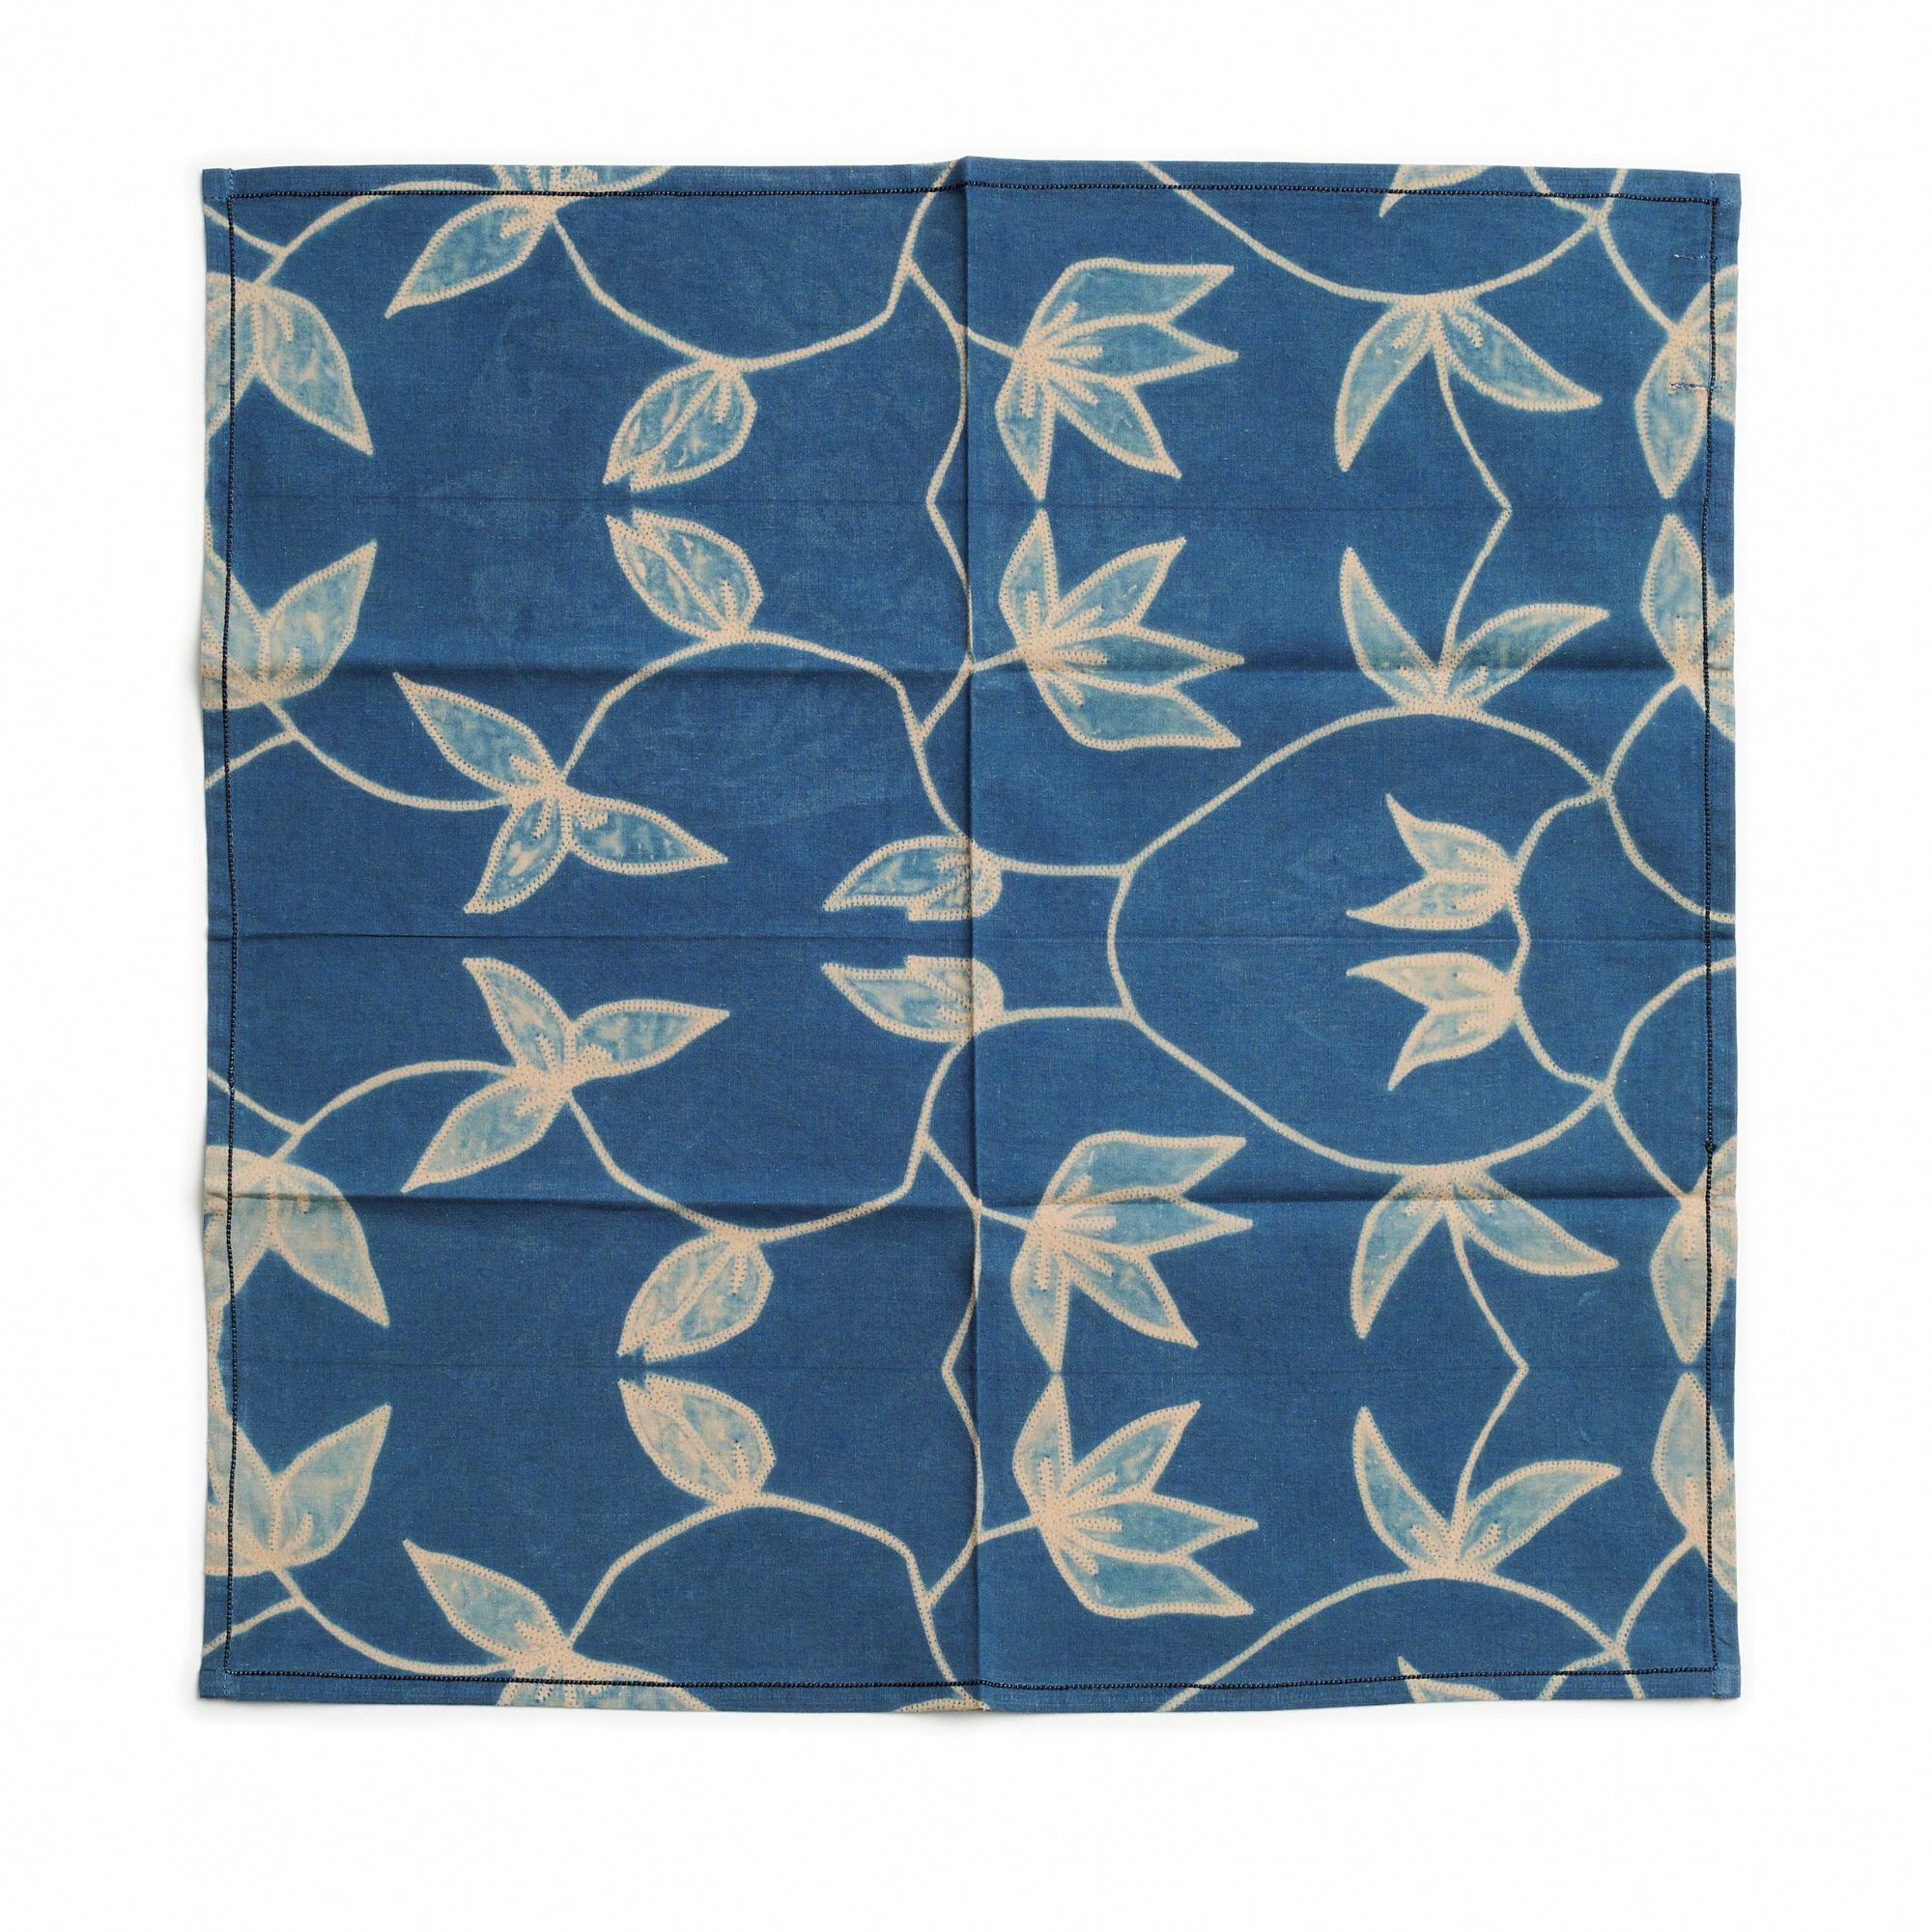 Folio Indigo  table napkin is a unique modern artisanal napkin. Created artistically and ethically by artisans in India using shibori  print technique, using only pure natural dyes. It is a pure statement piece that adds modern and timeless quality